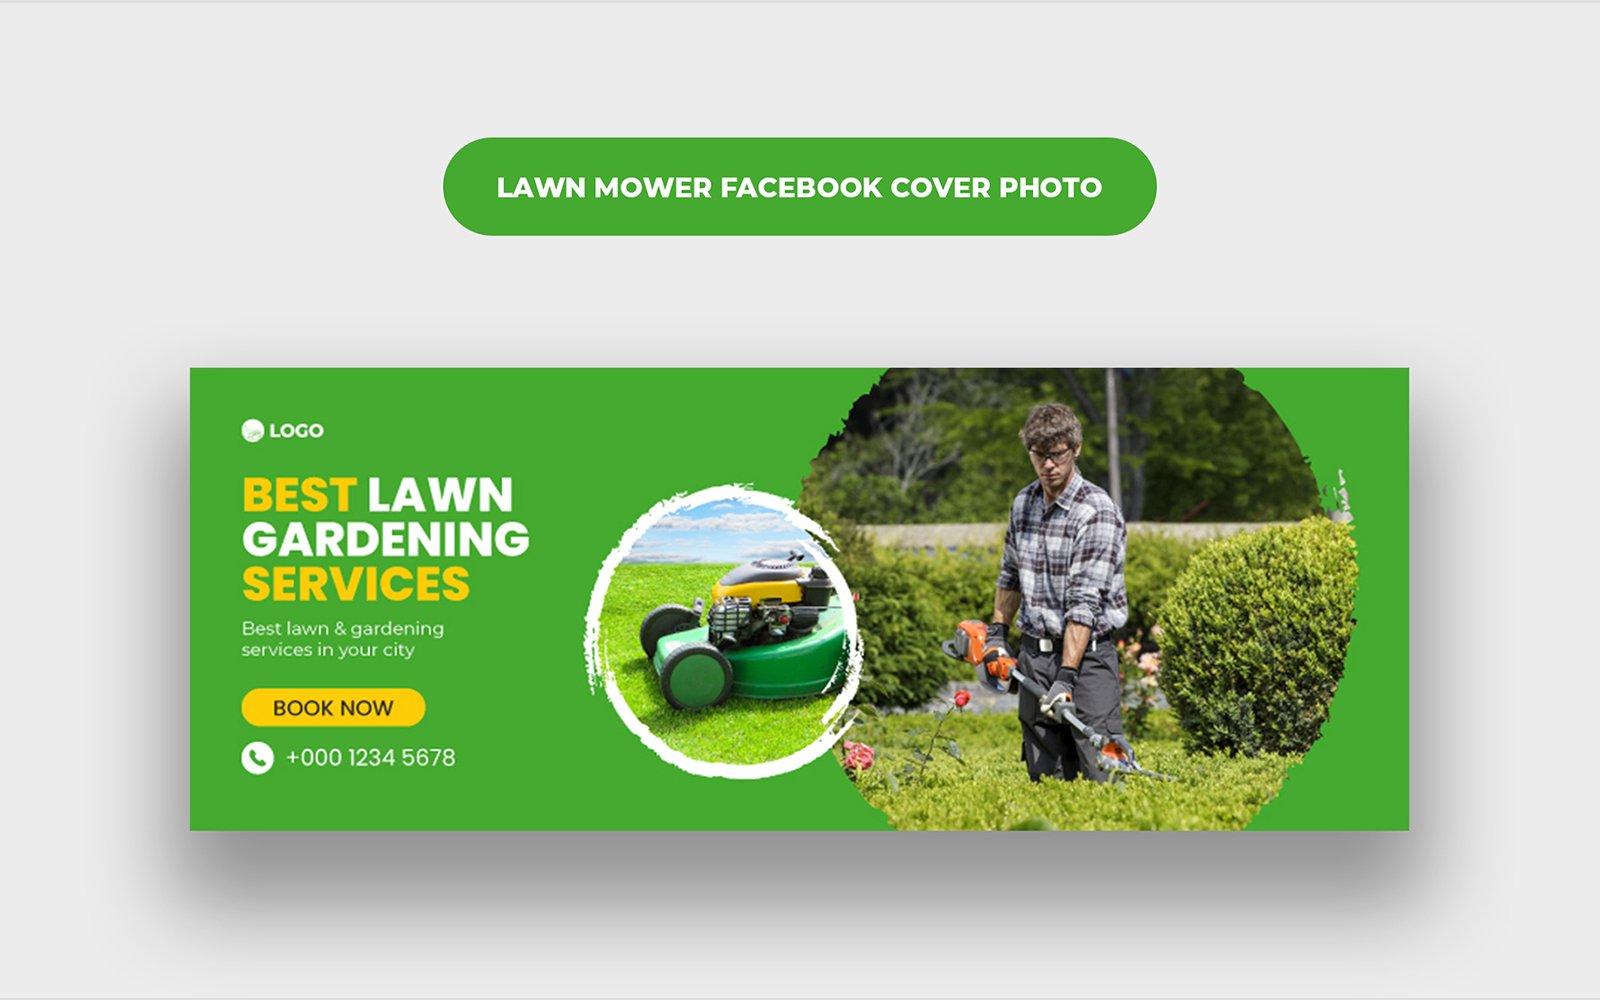 Lawn Mower Facebook Cover Photo Template